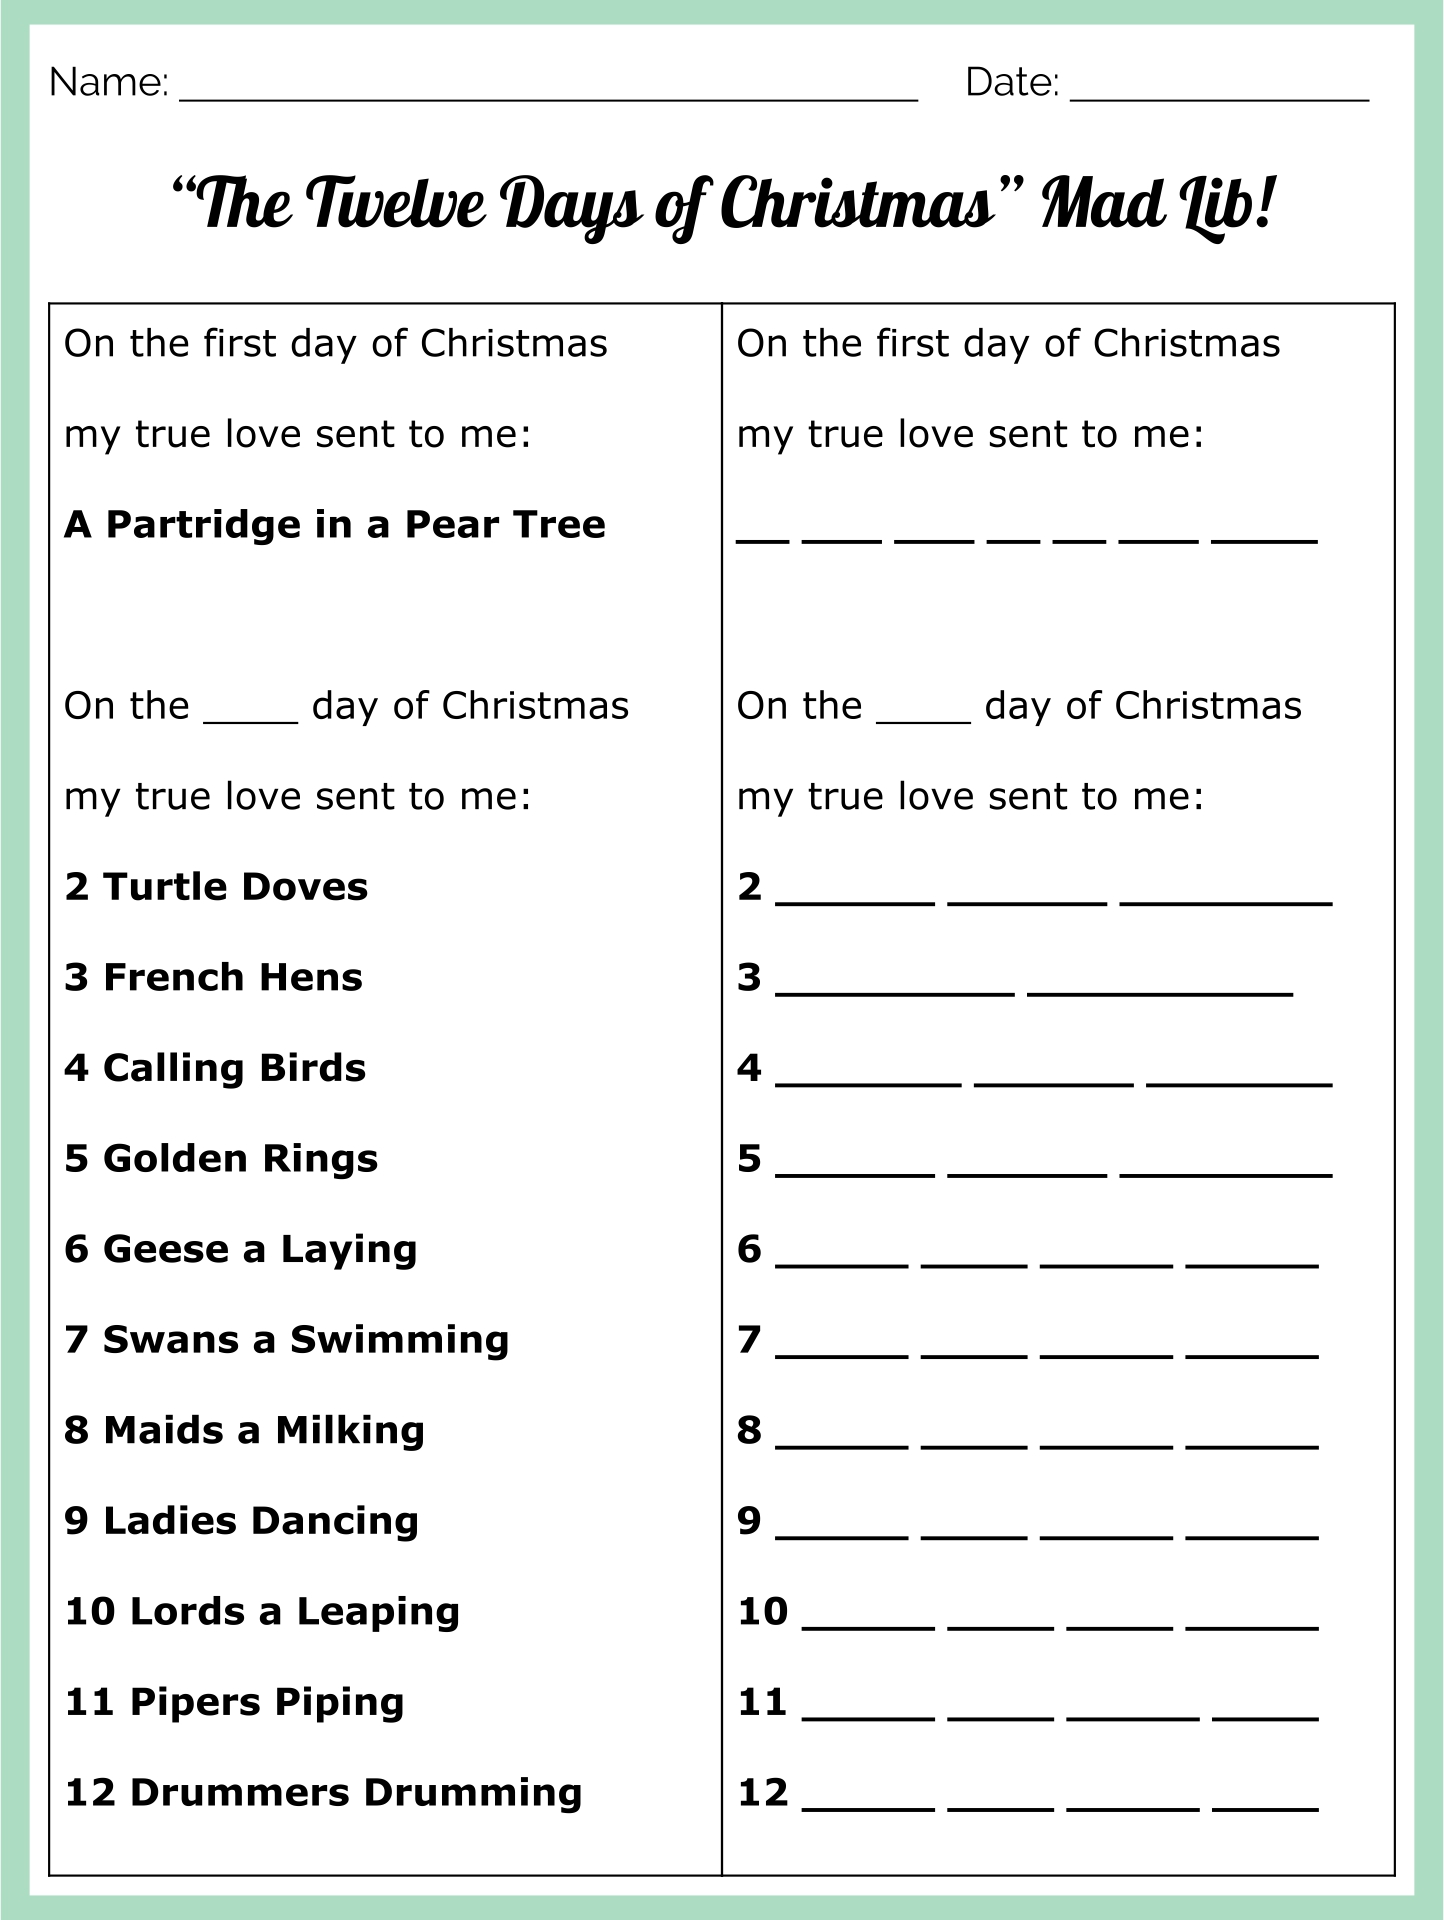 7-best-images-of-mad-libs-printable-christmas-cookies-christmas-carol-mad-libs-printable